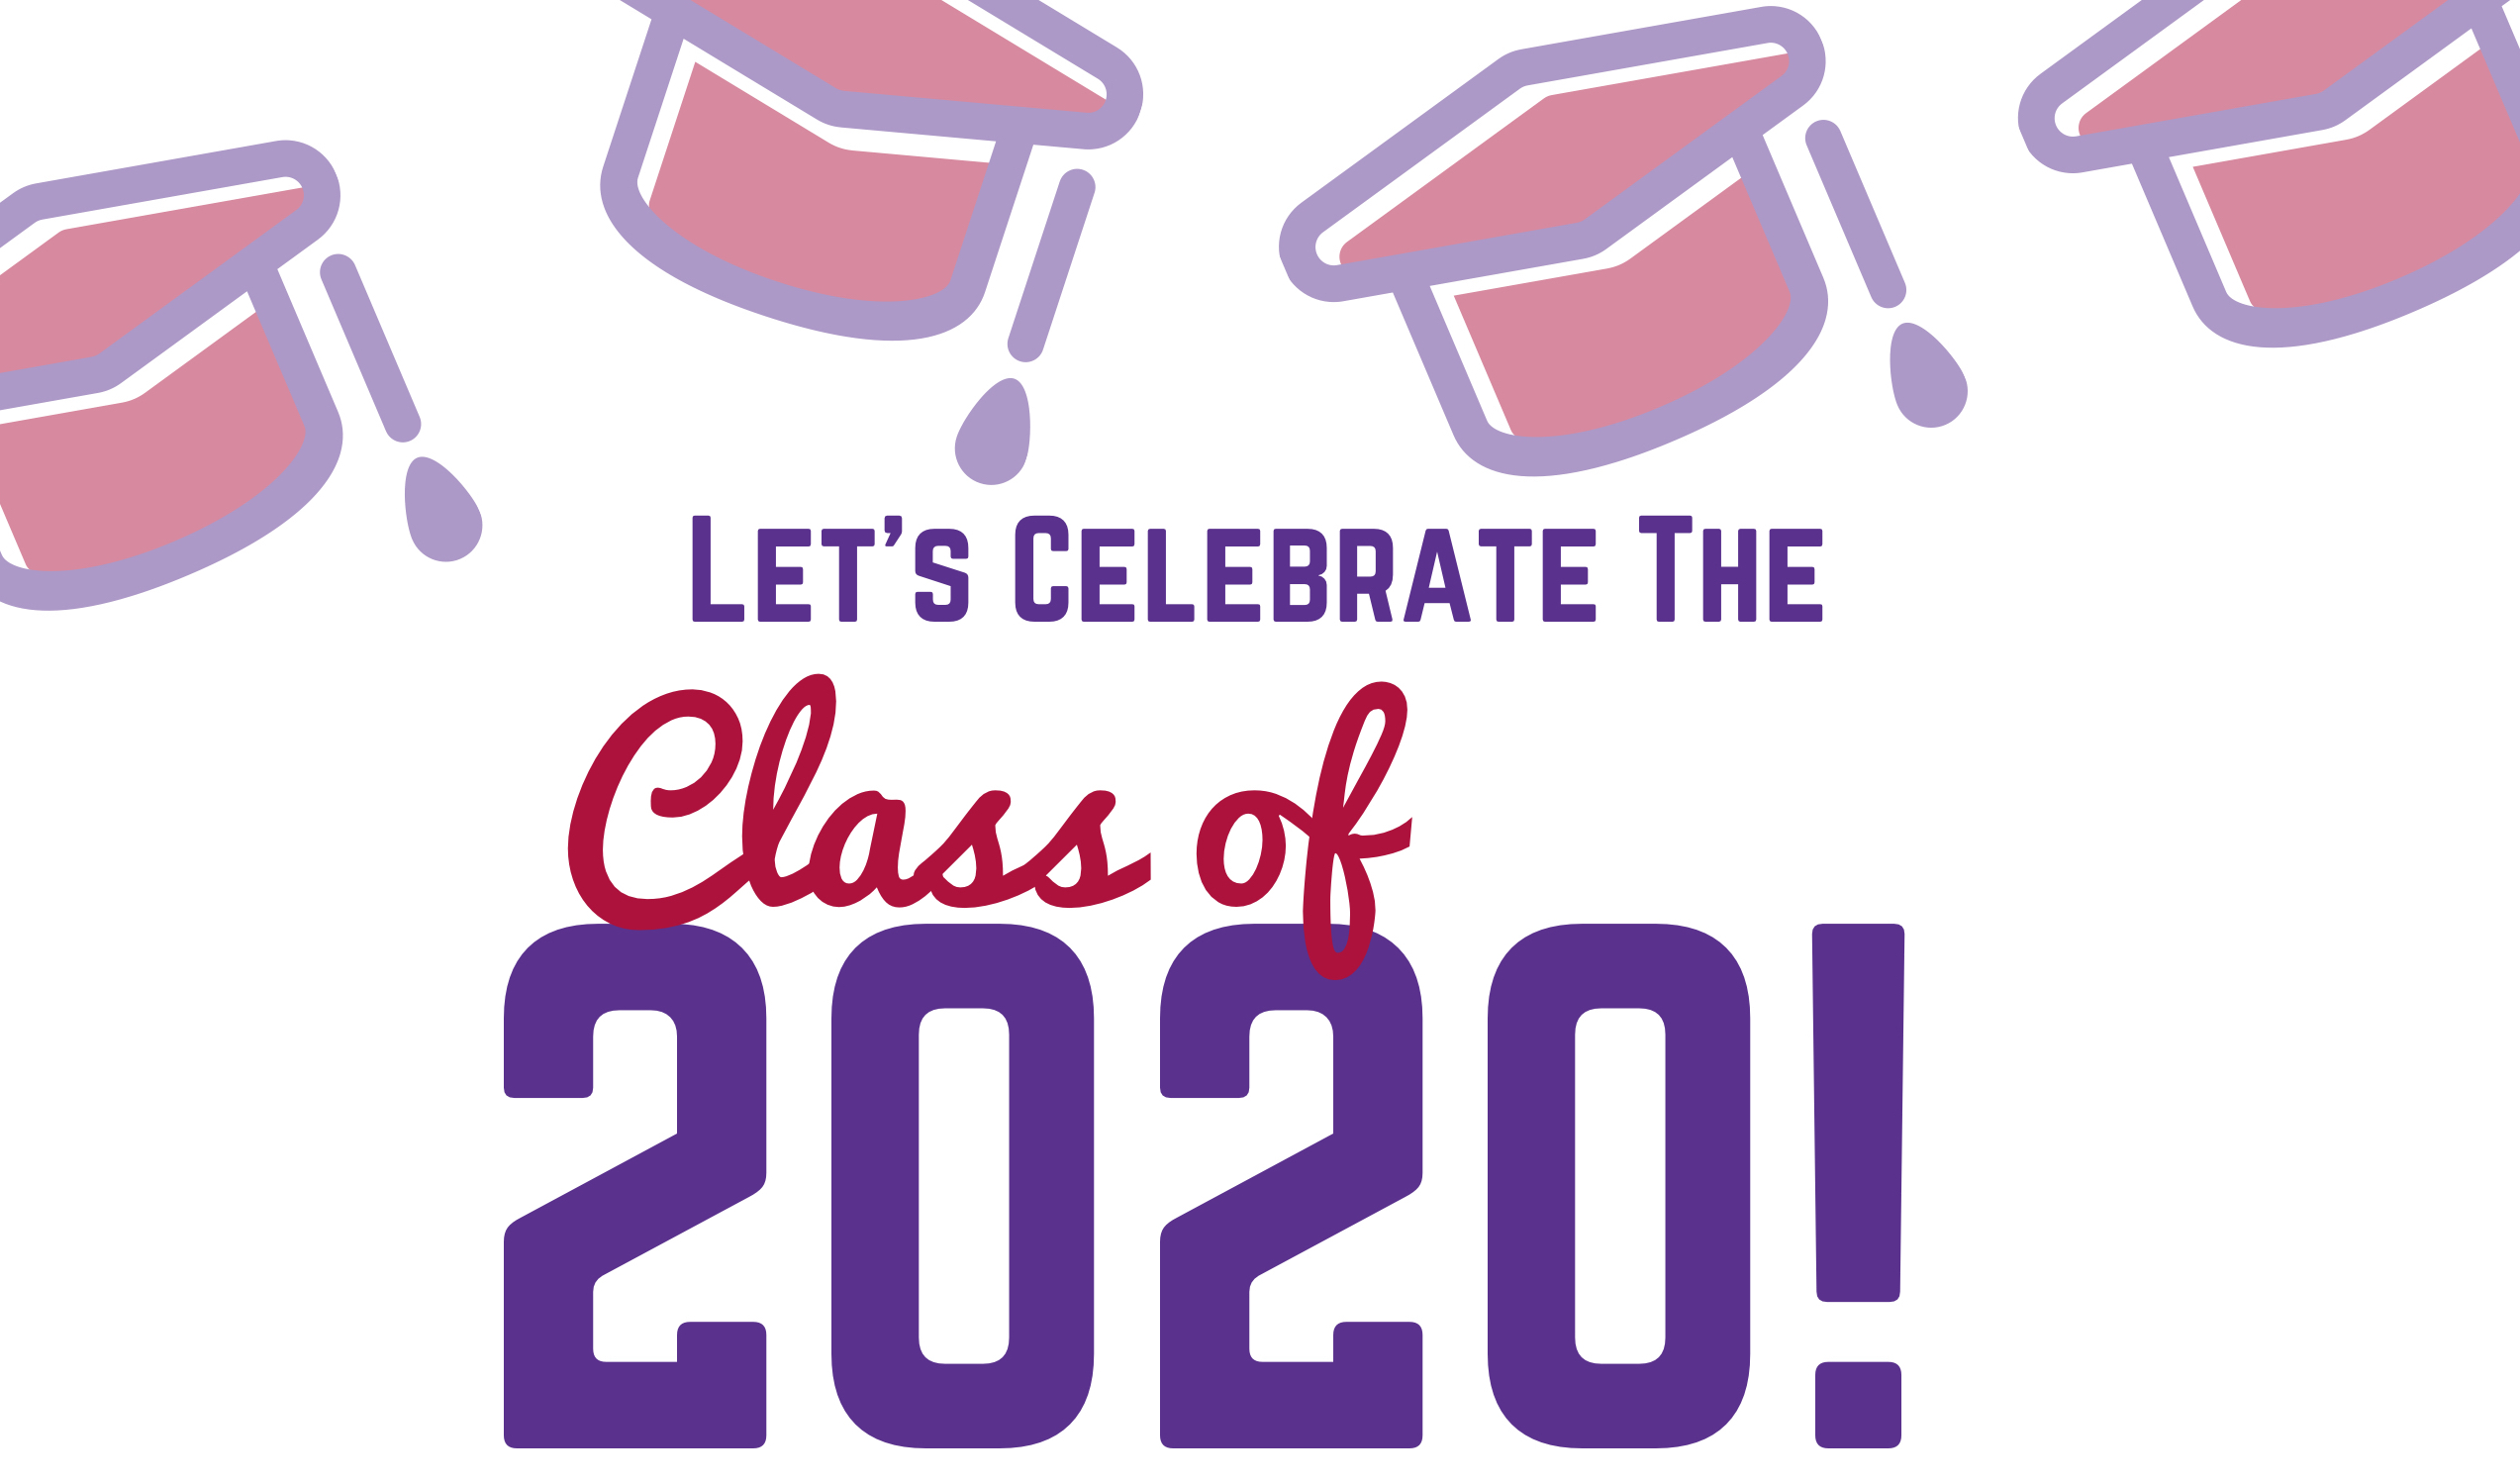 let's celebrate the class of 2020